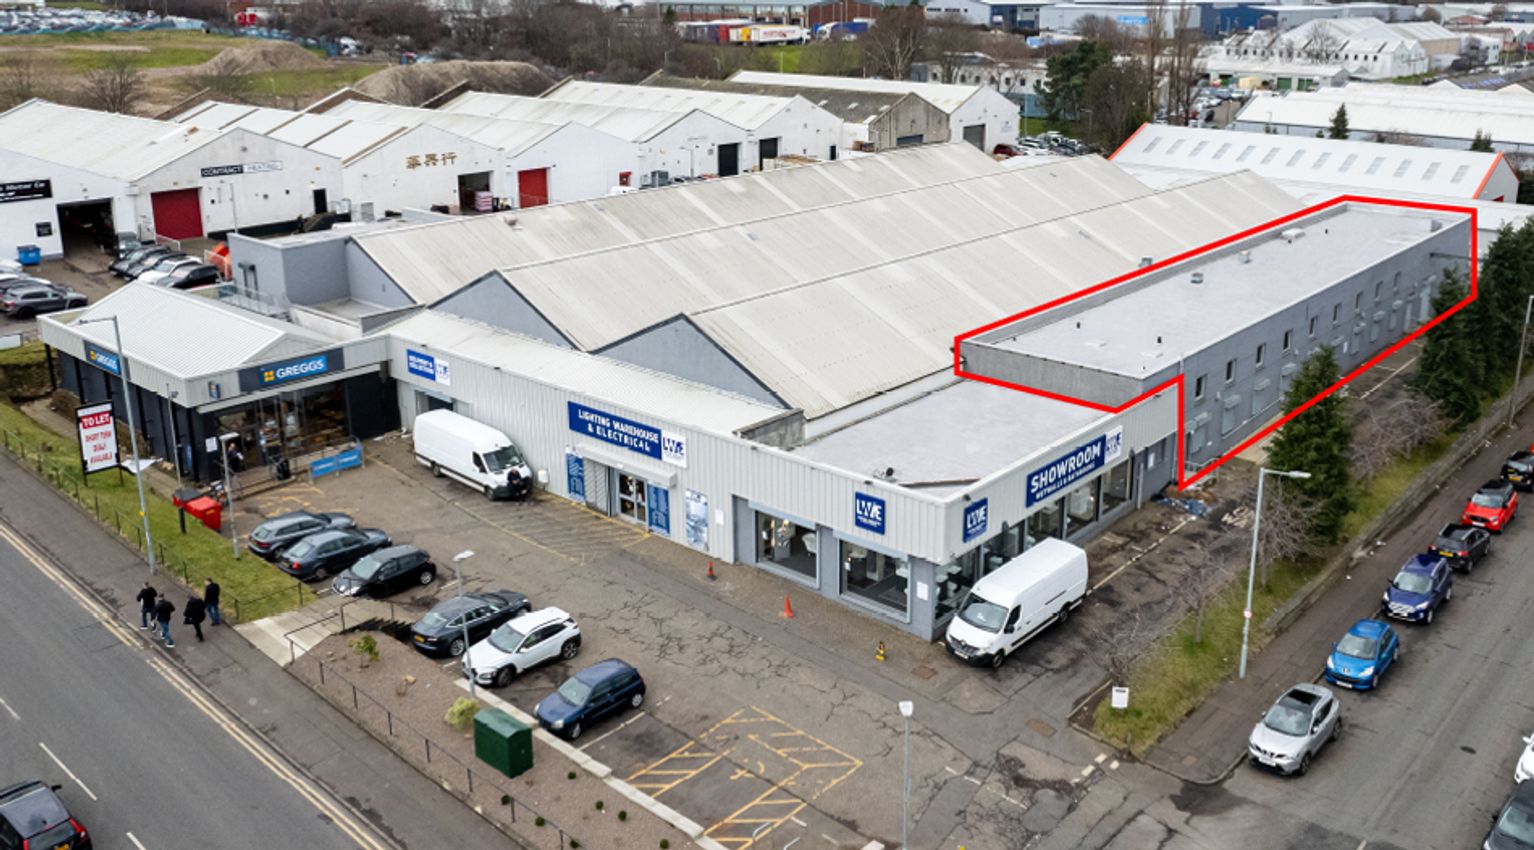 Sighthill One Unit D, 1-3, Bankhead Medway, Sighthill Industrial Estate, Edinburgh, EH11 4BY